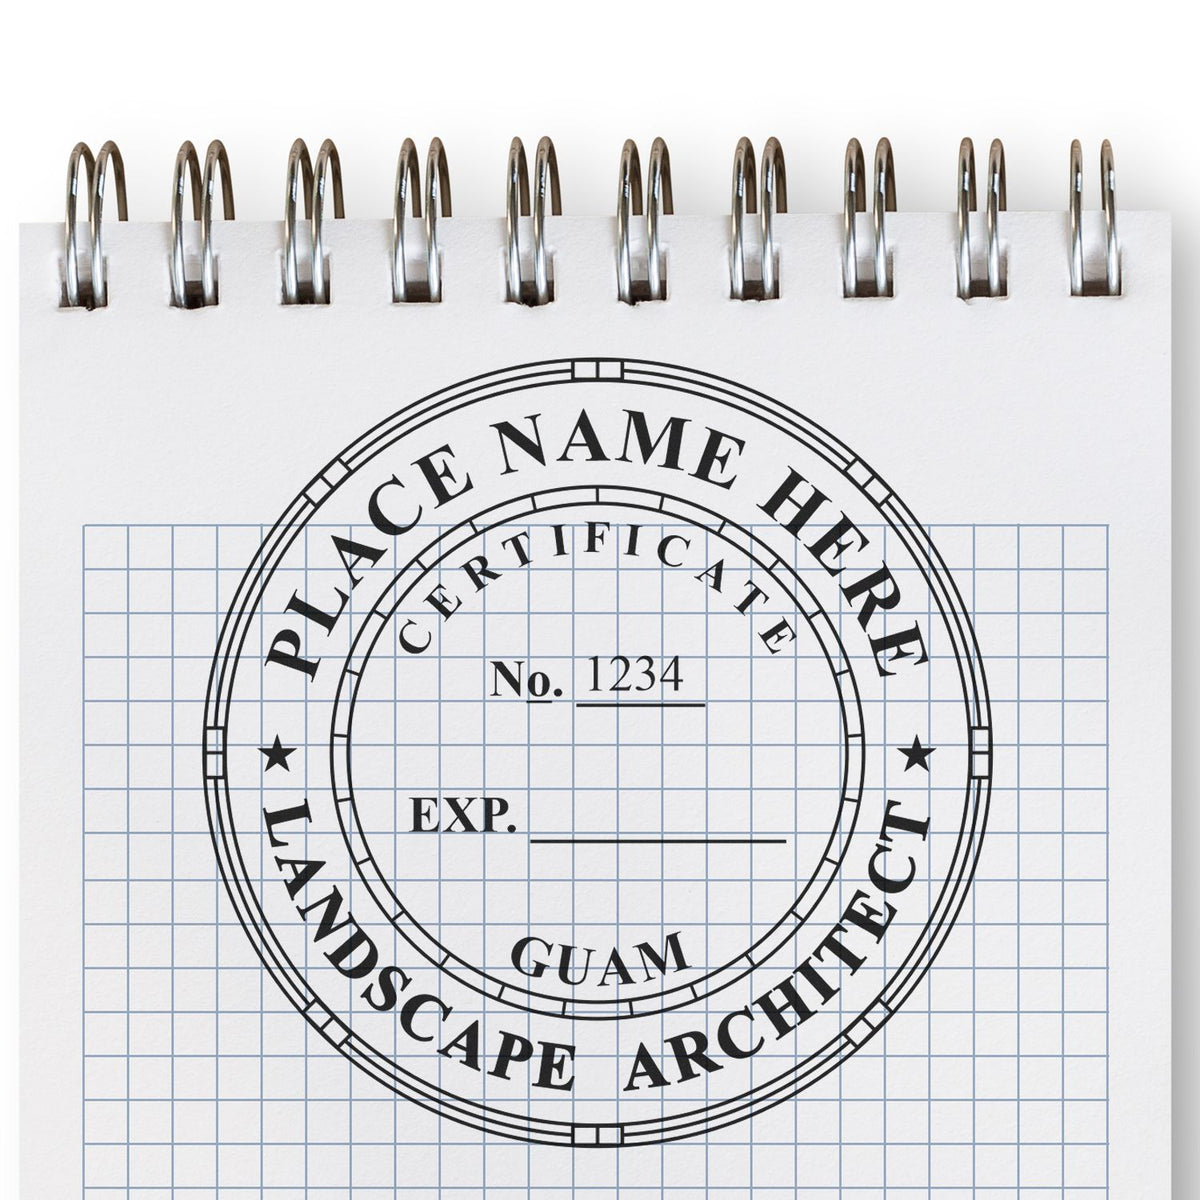 A stamped impression of the Self-Inking Guam Landscape Architect Stamp in this stylish lifestyle photo, setting the tone for a unique and personalized product.